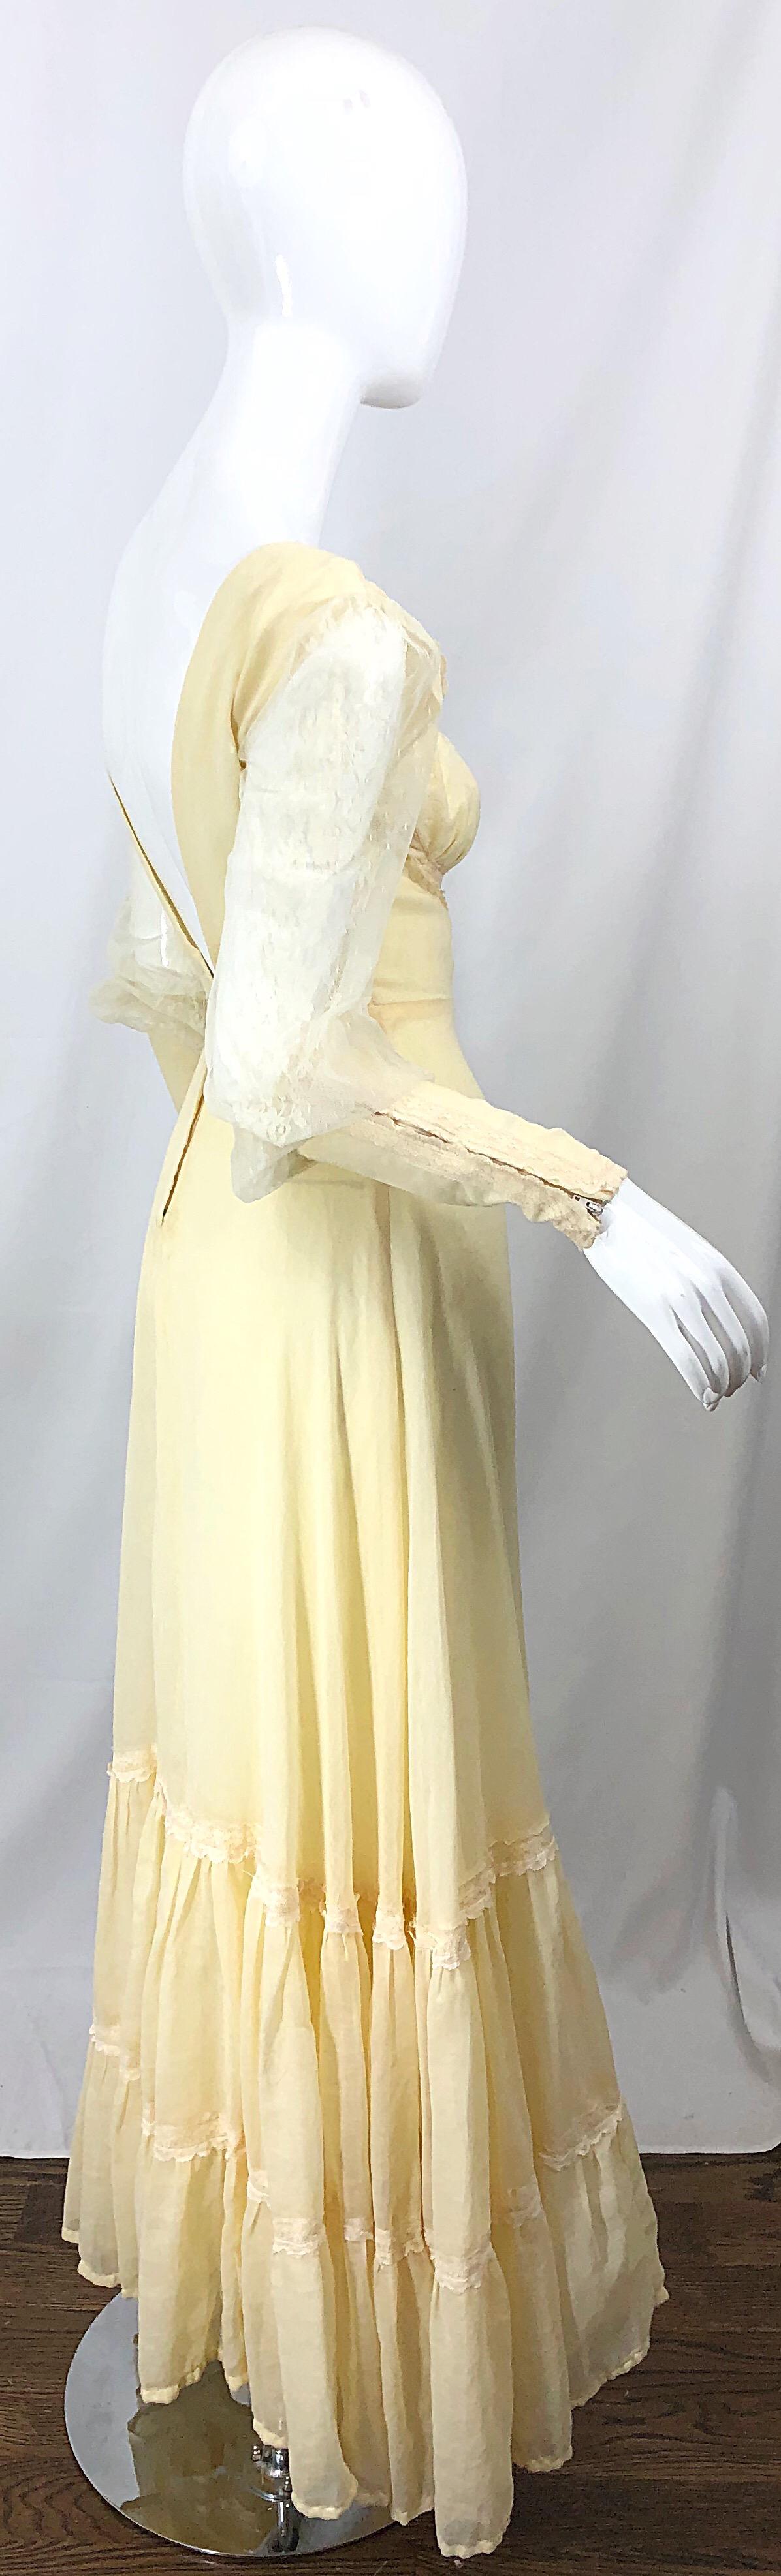 1970s Victorian Inspired Pale Yellow Cotton Voile + Lace Peasant 70s Maxi Dress For Sale 6